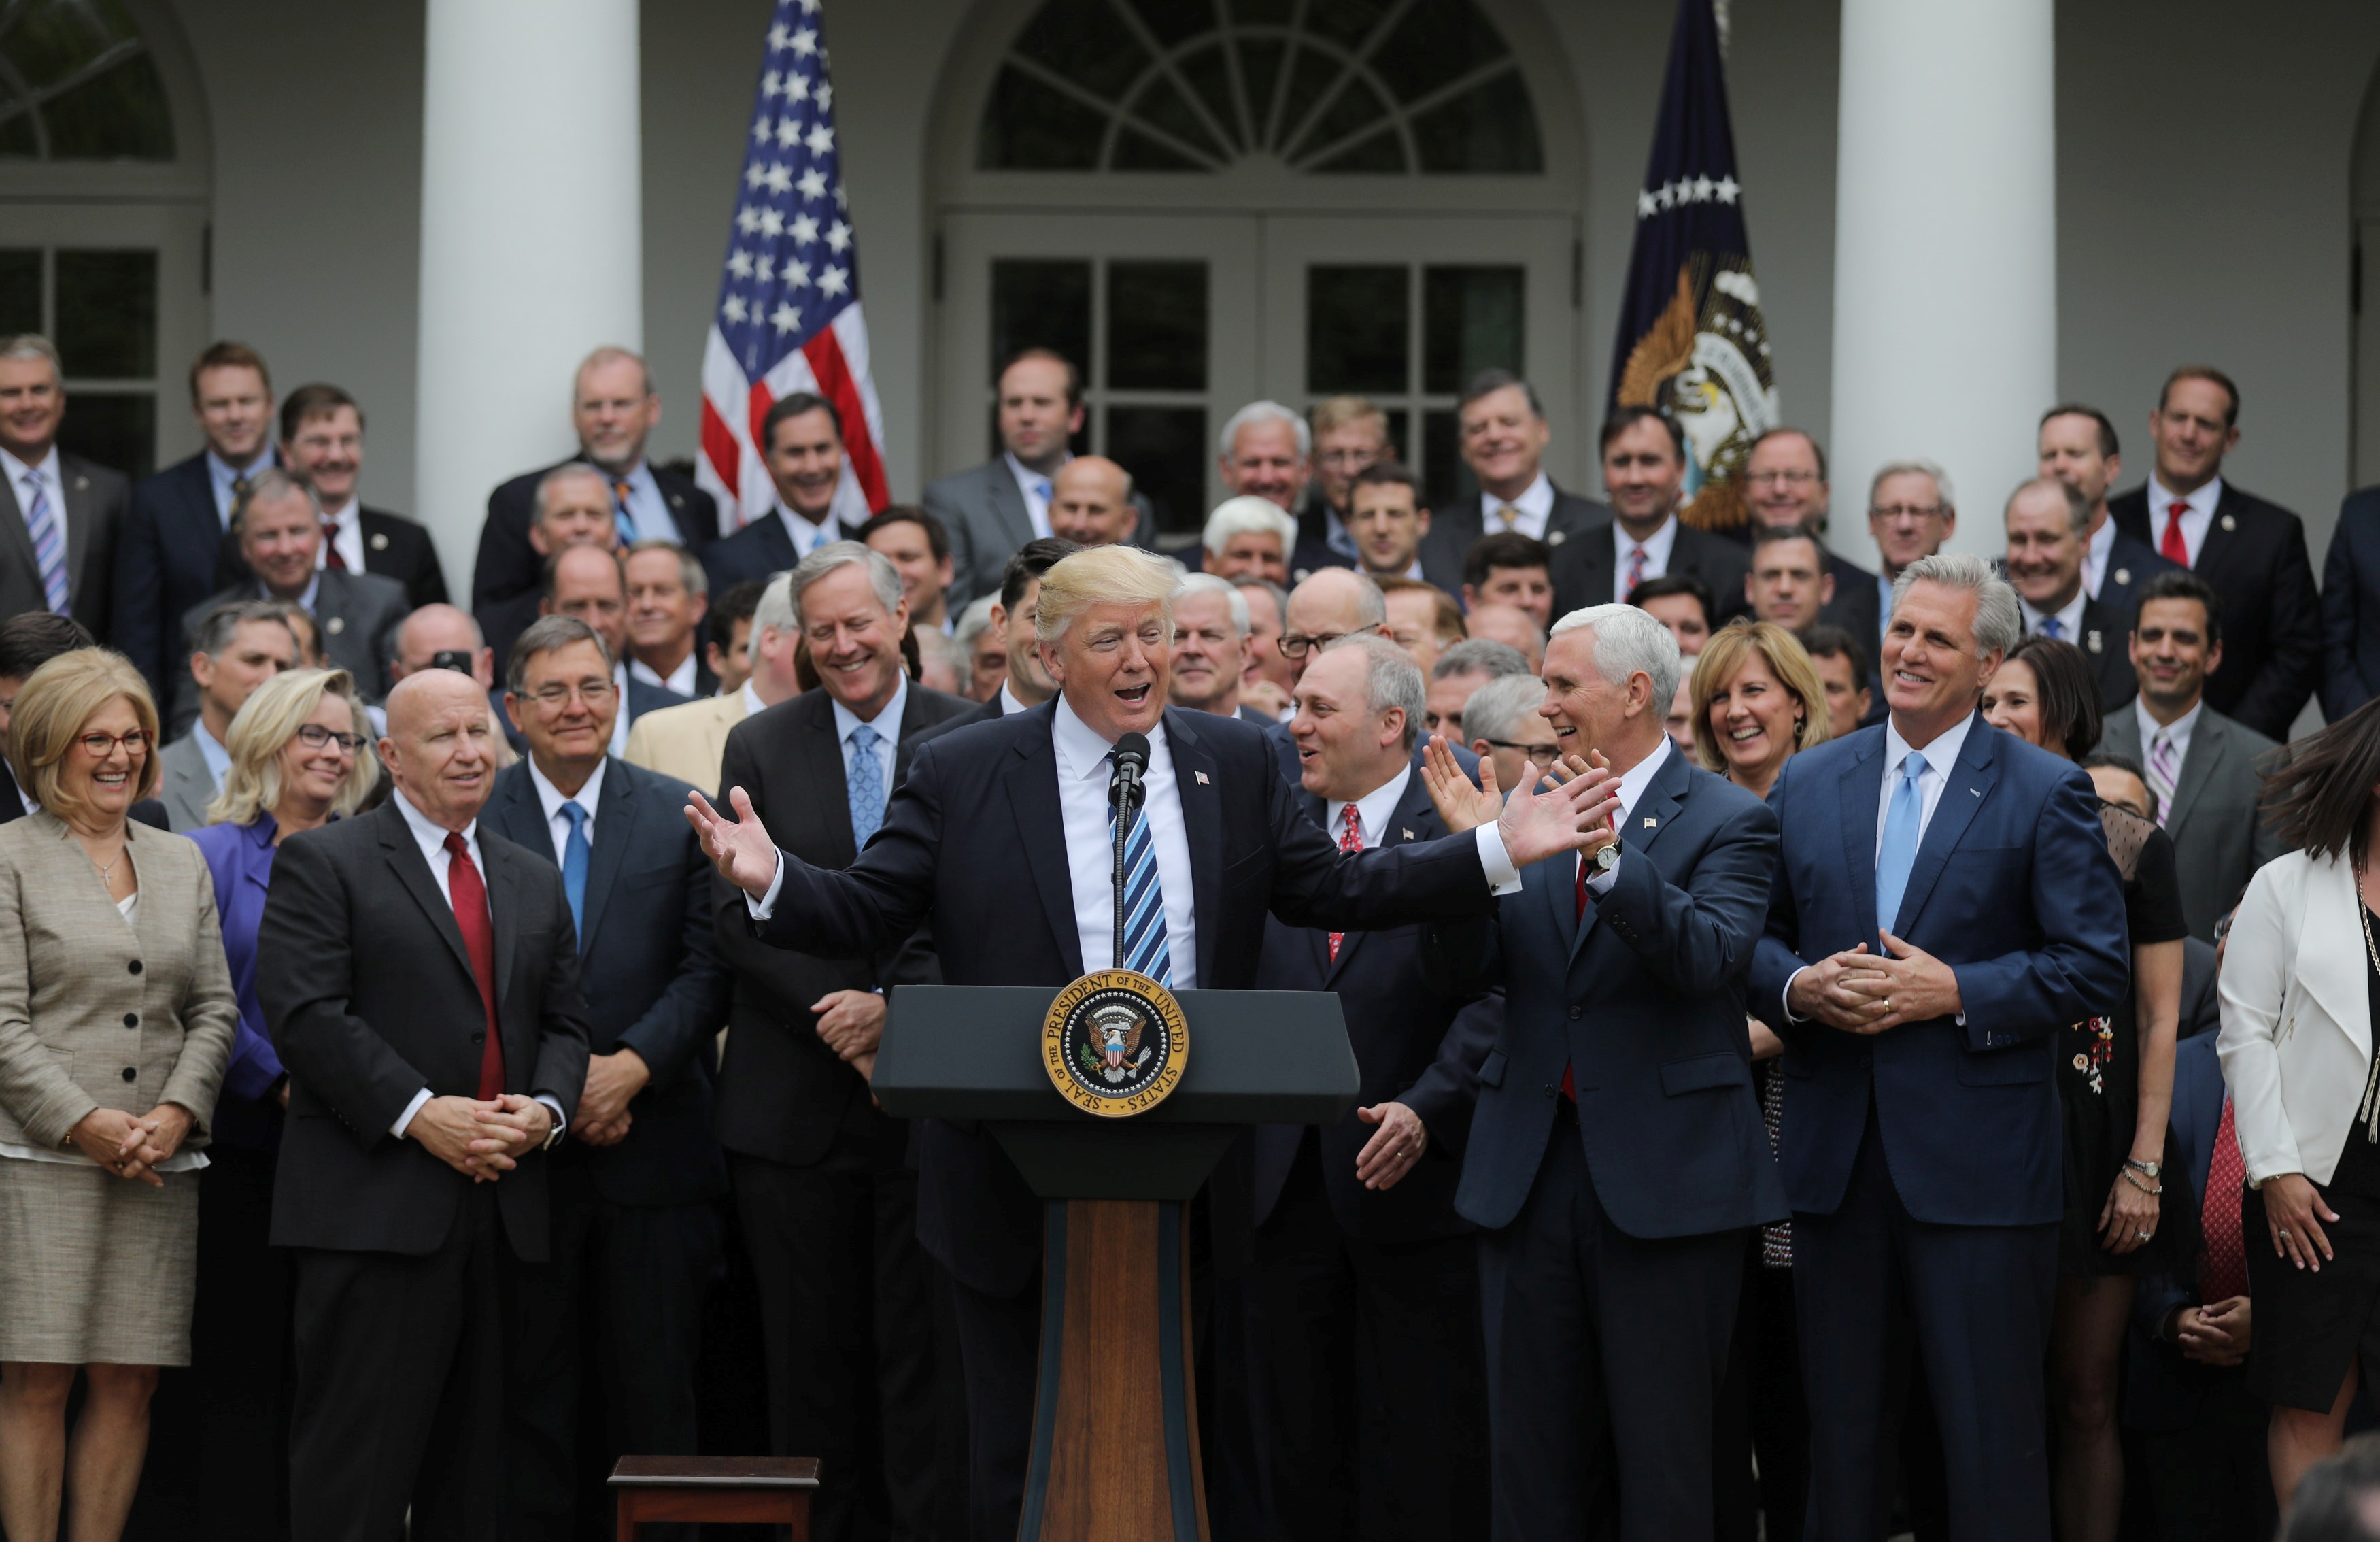 President Donald Trump gathers with Congressional Republicans in the Rose Garden of the White House after the House of Representatives approved the American Healthcare Act, to repeal major parts of Obamacare and replace it with the Republican healthcare plan, in Washington, May 4, 2017. (Carlos Barria—Reuters)